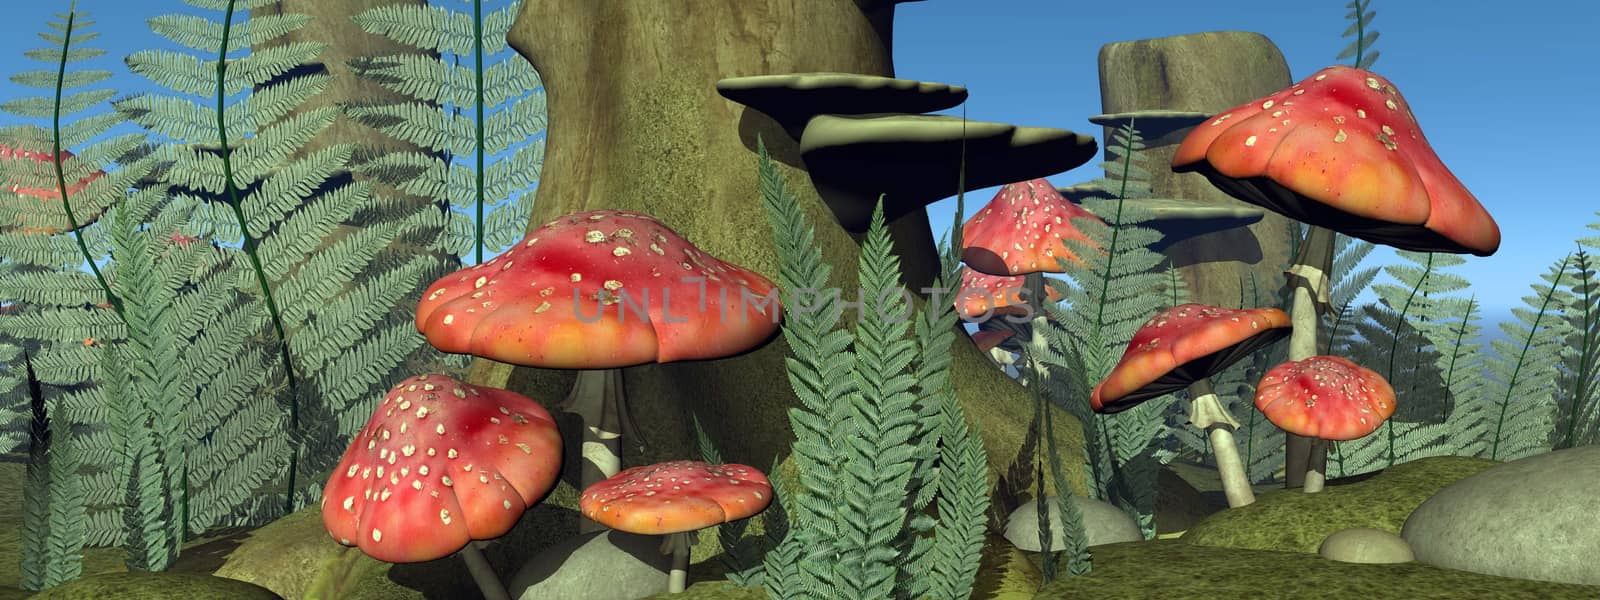 Fly agaric mushrooms in the forest - 3D render by Elenaphotos21